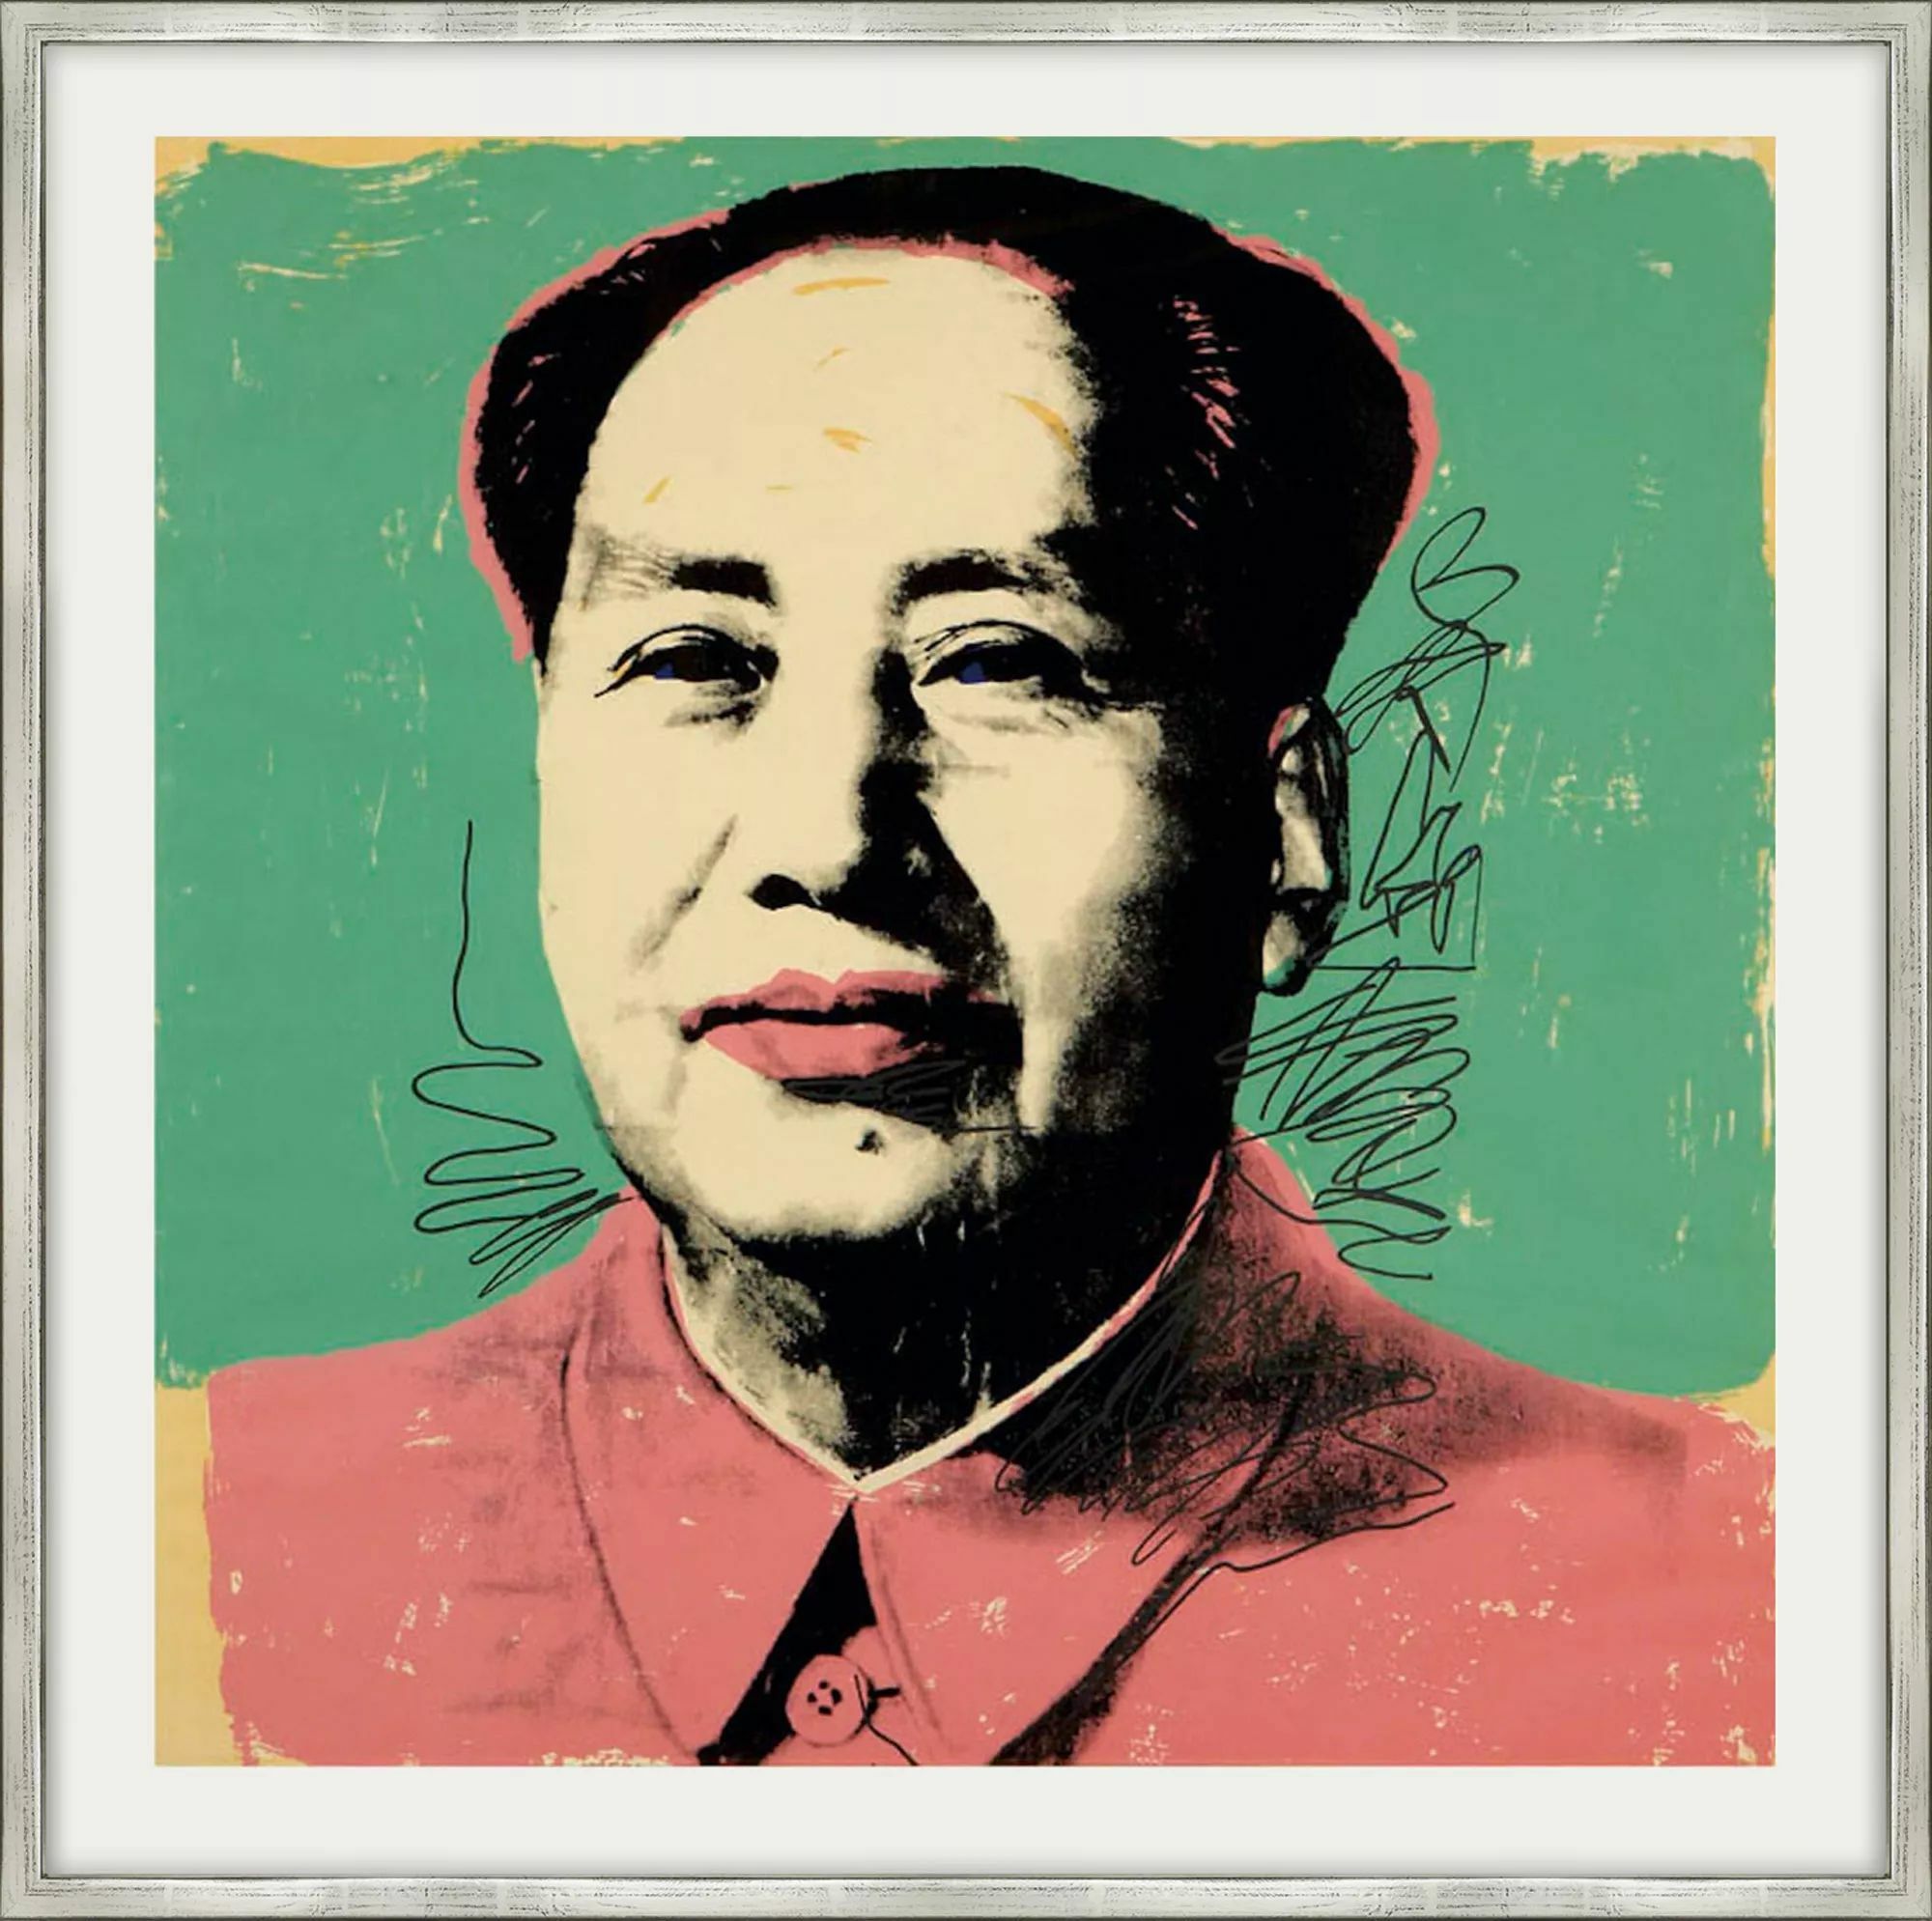 Picture "Mao (FS II.92)" (1972) by Andy Warhol